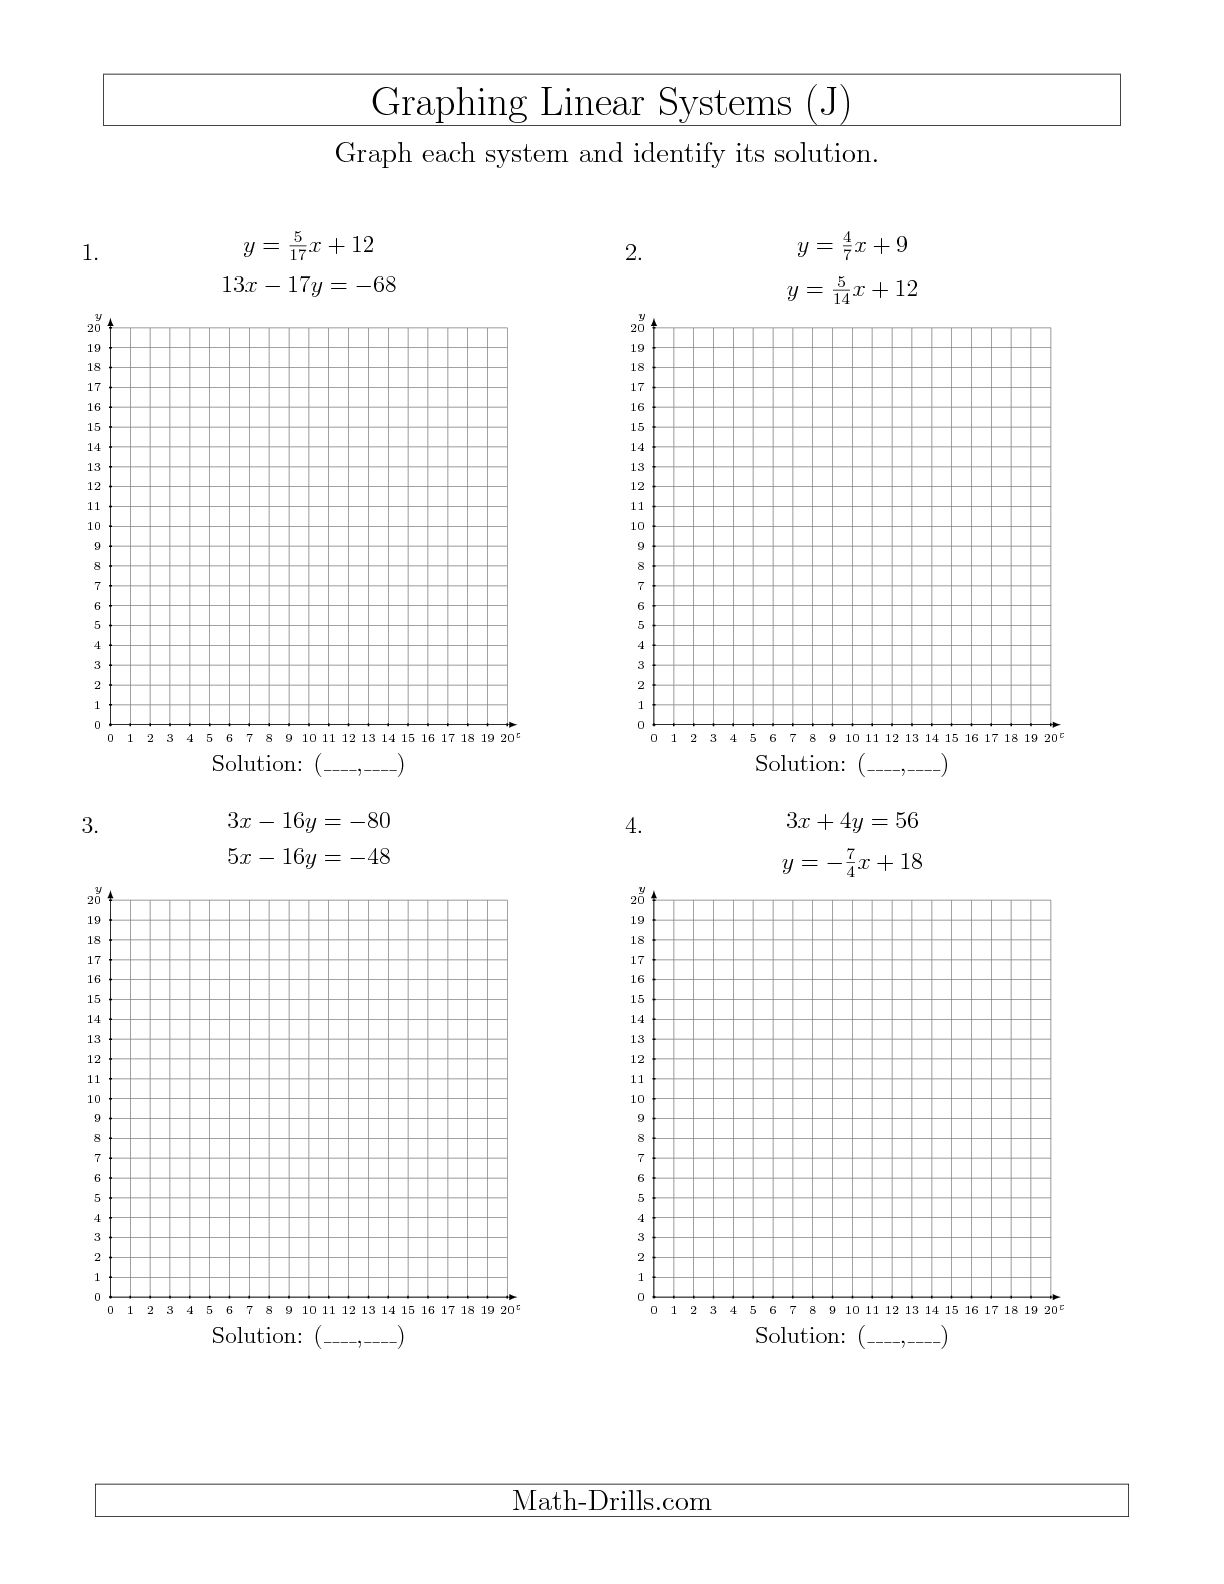 Graphing Linear Equations Worksheet Image